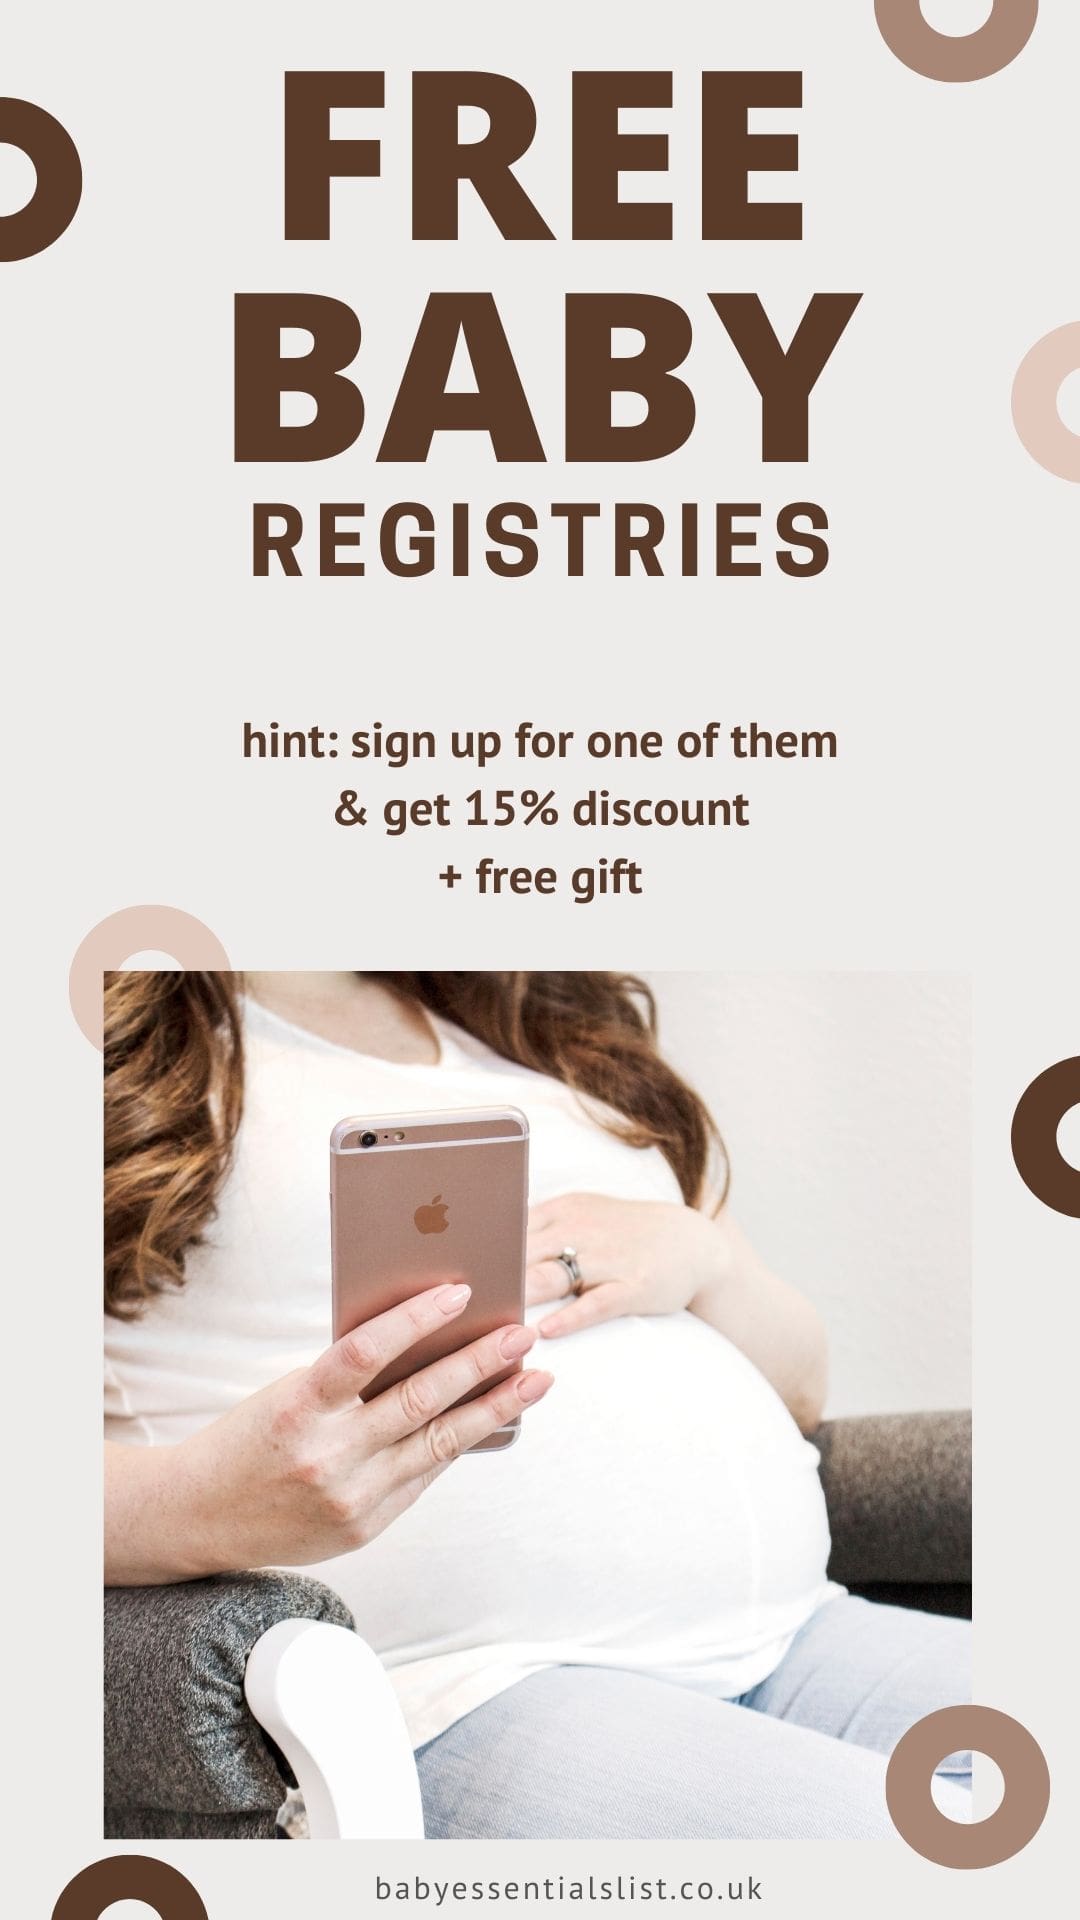 Free baby registries. Sign up get 15% discount and a free gift